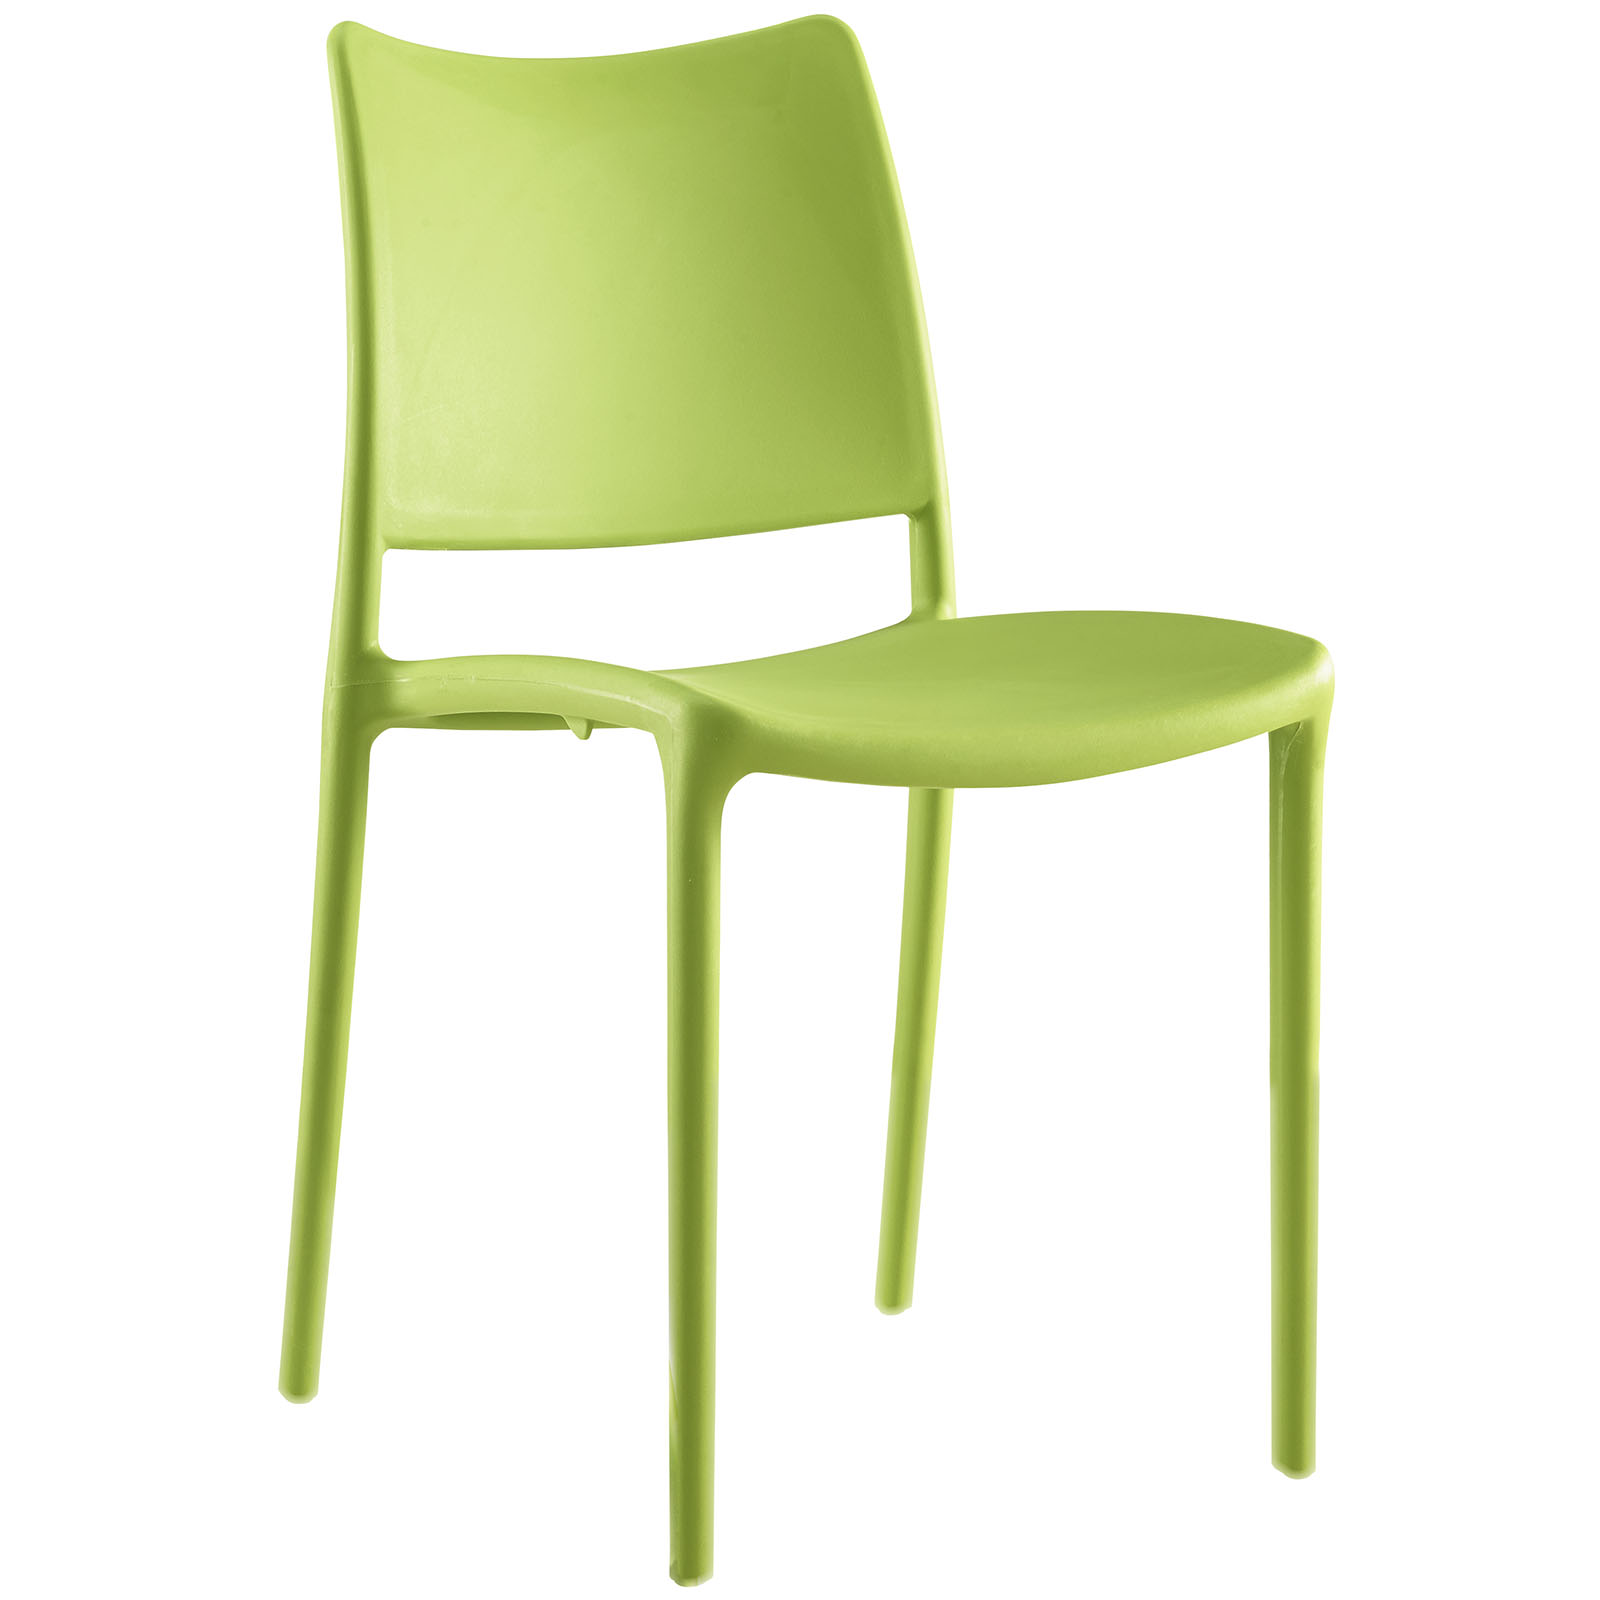 Modern Contemporary Urban Design Outdoor Kitchen Room Dining Chair ( Set of 4), Green, Plastic - image 3 of 5